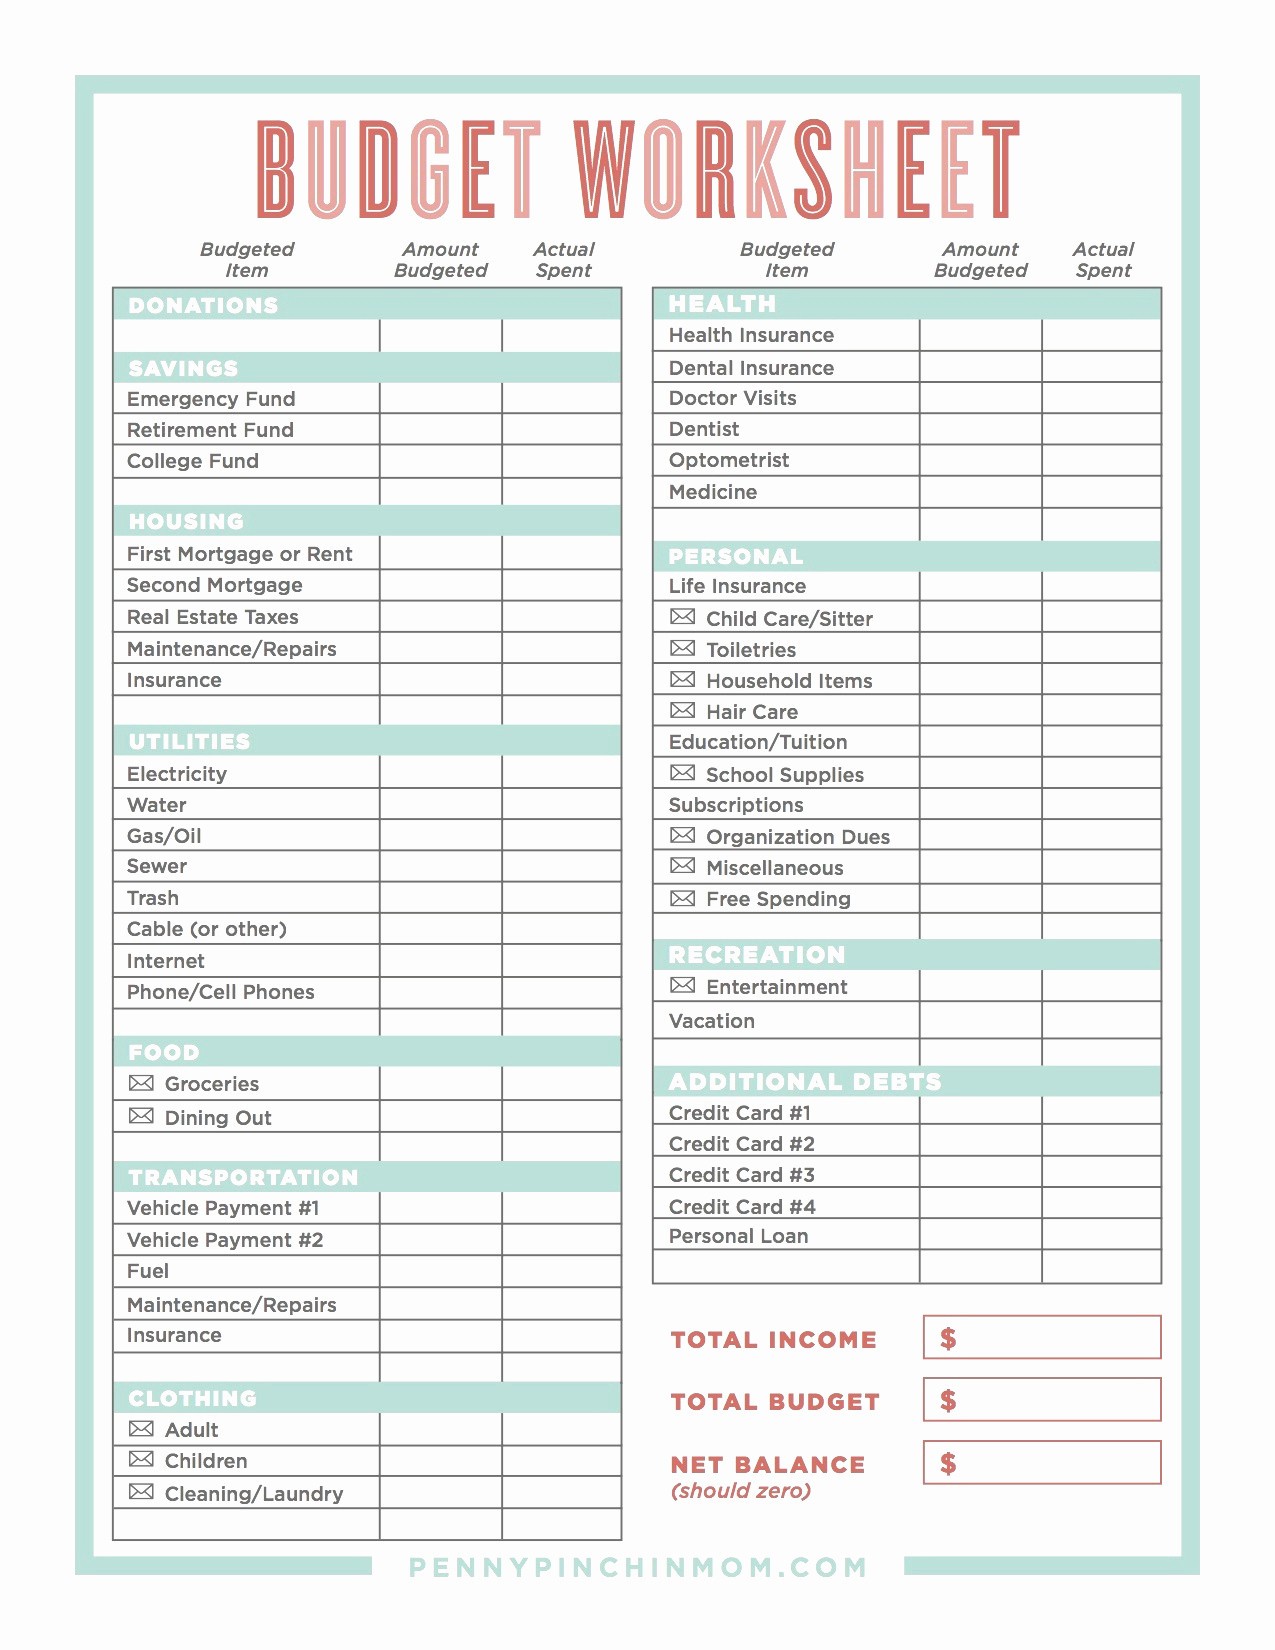 Printable Budget Worksheet Dave Ramsey Lovely How To Make A Good Bud Document